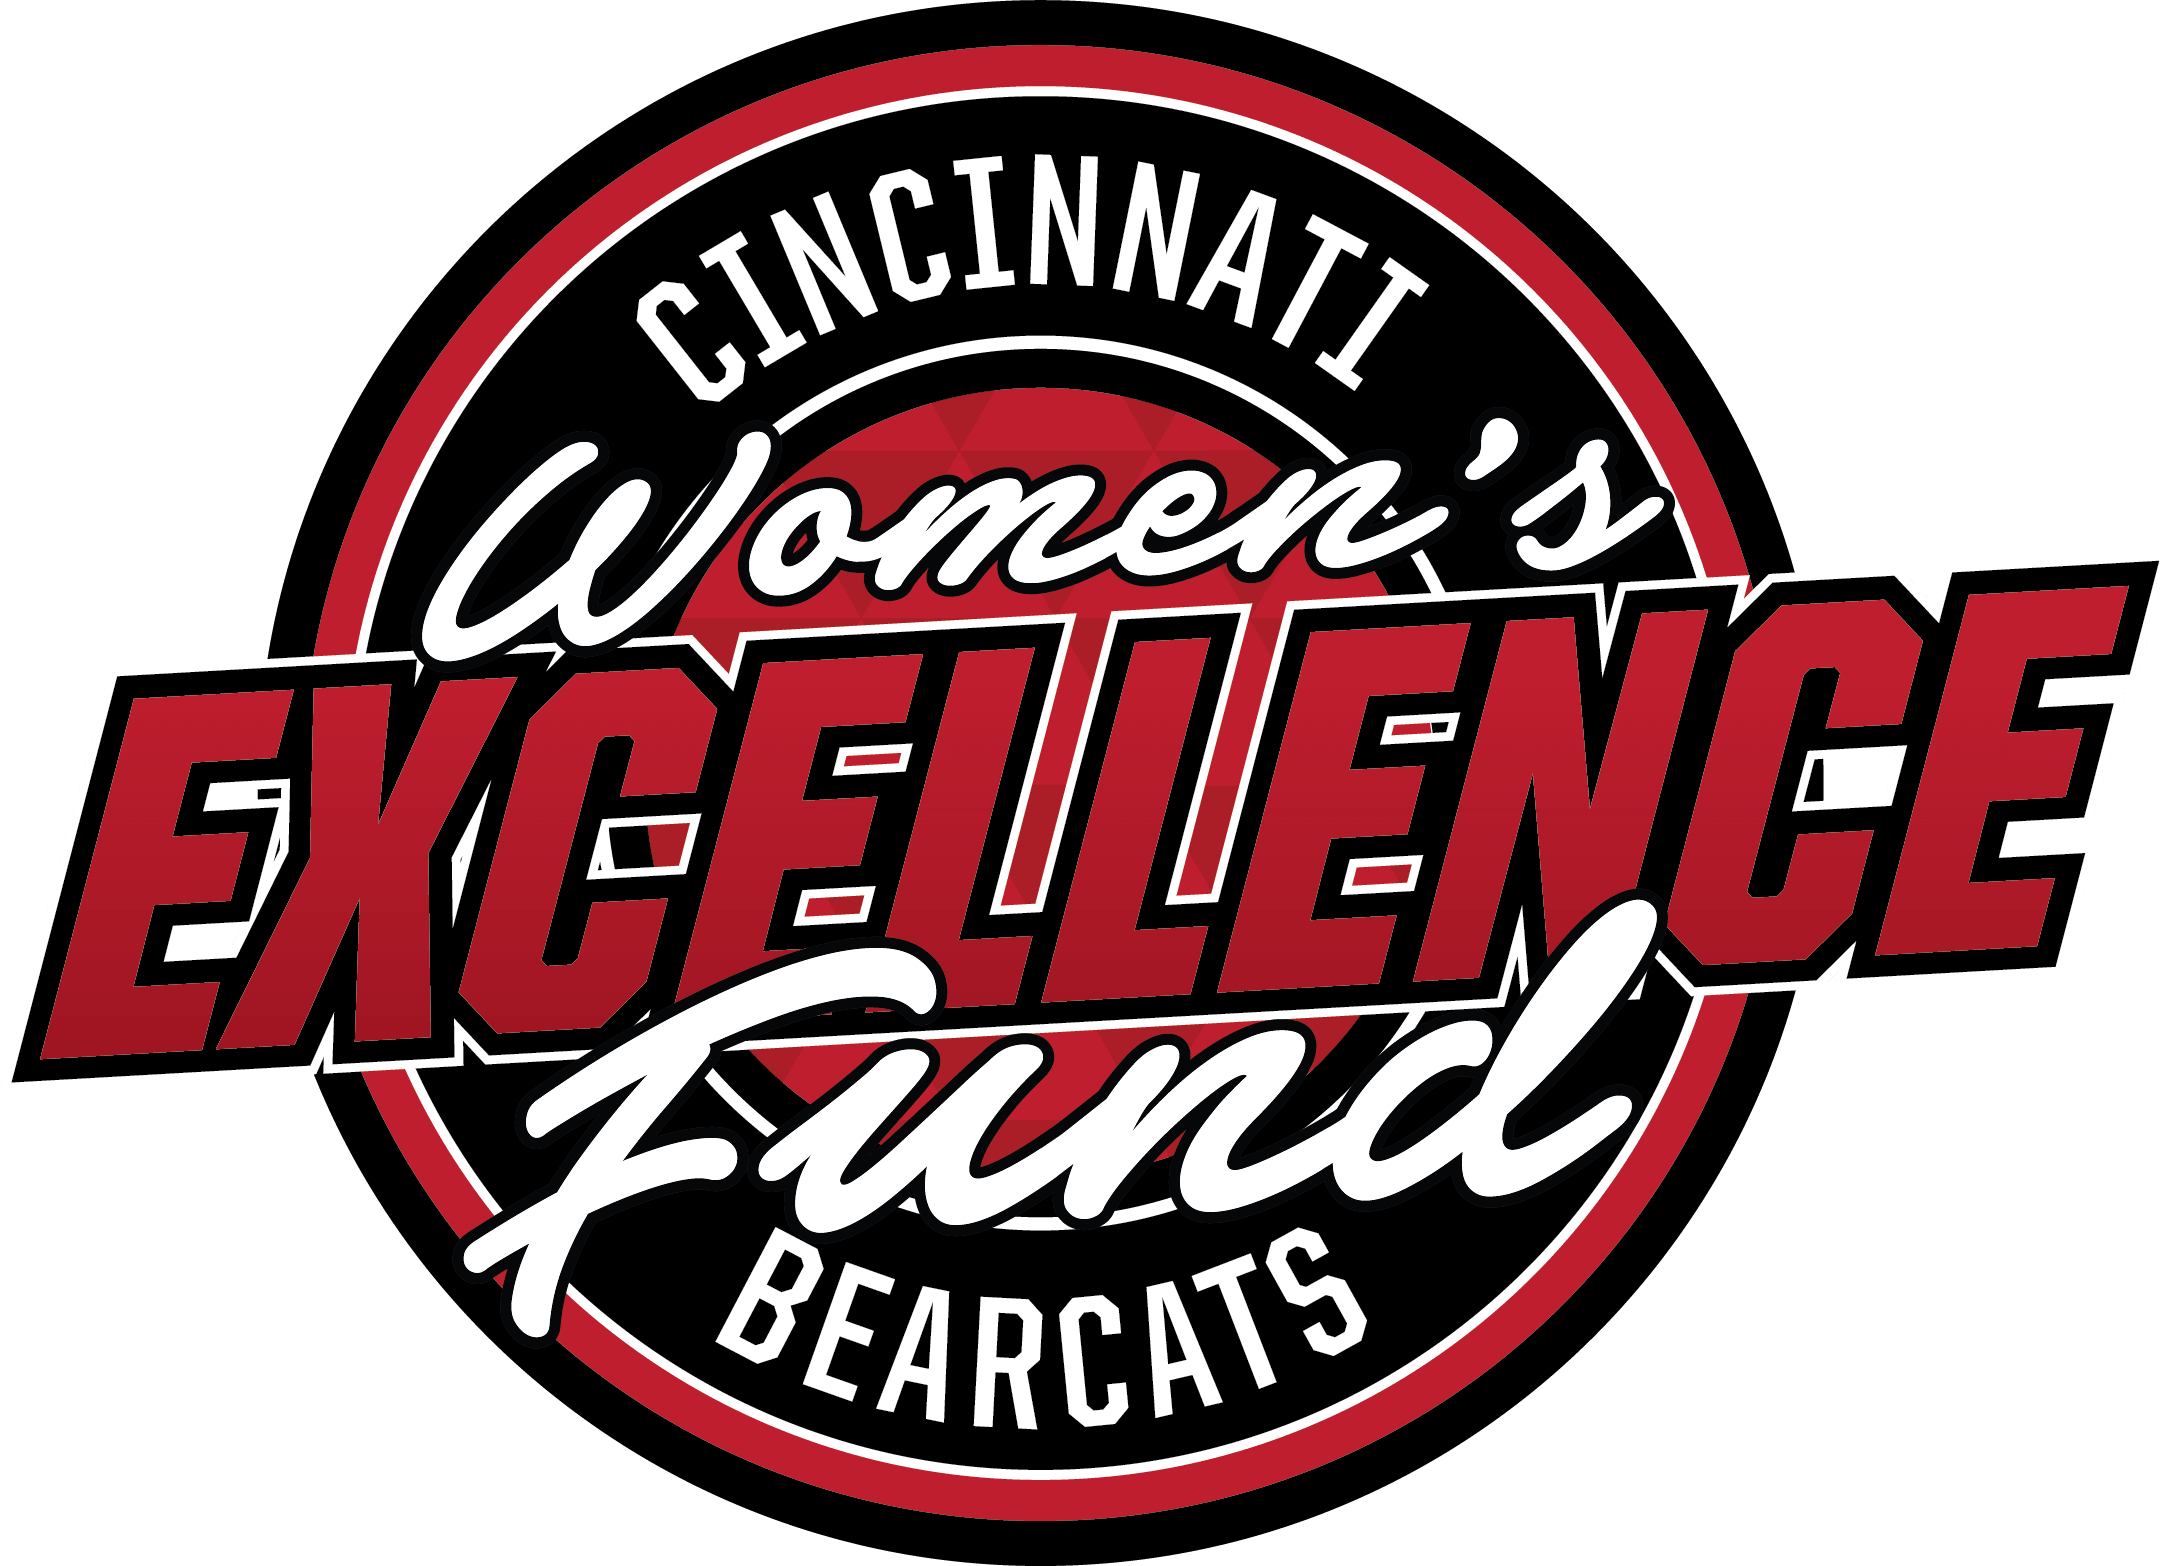 Women's Excellence Fund